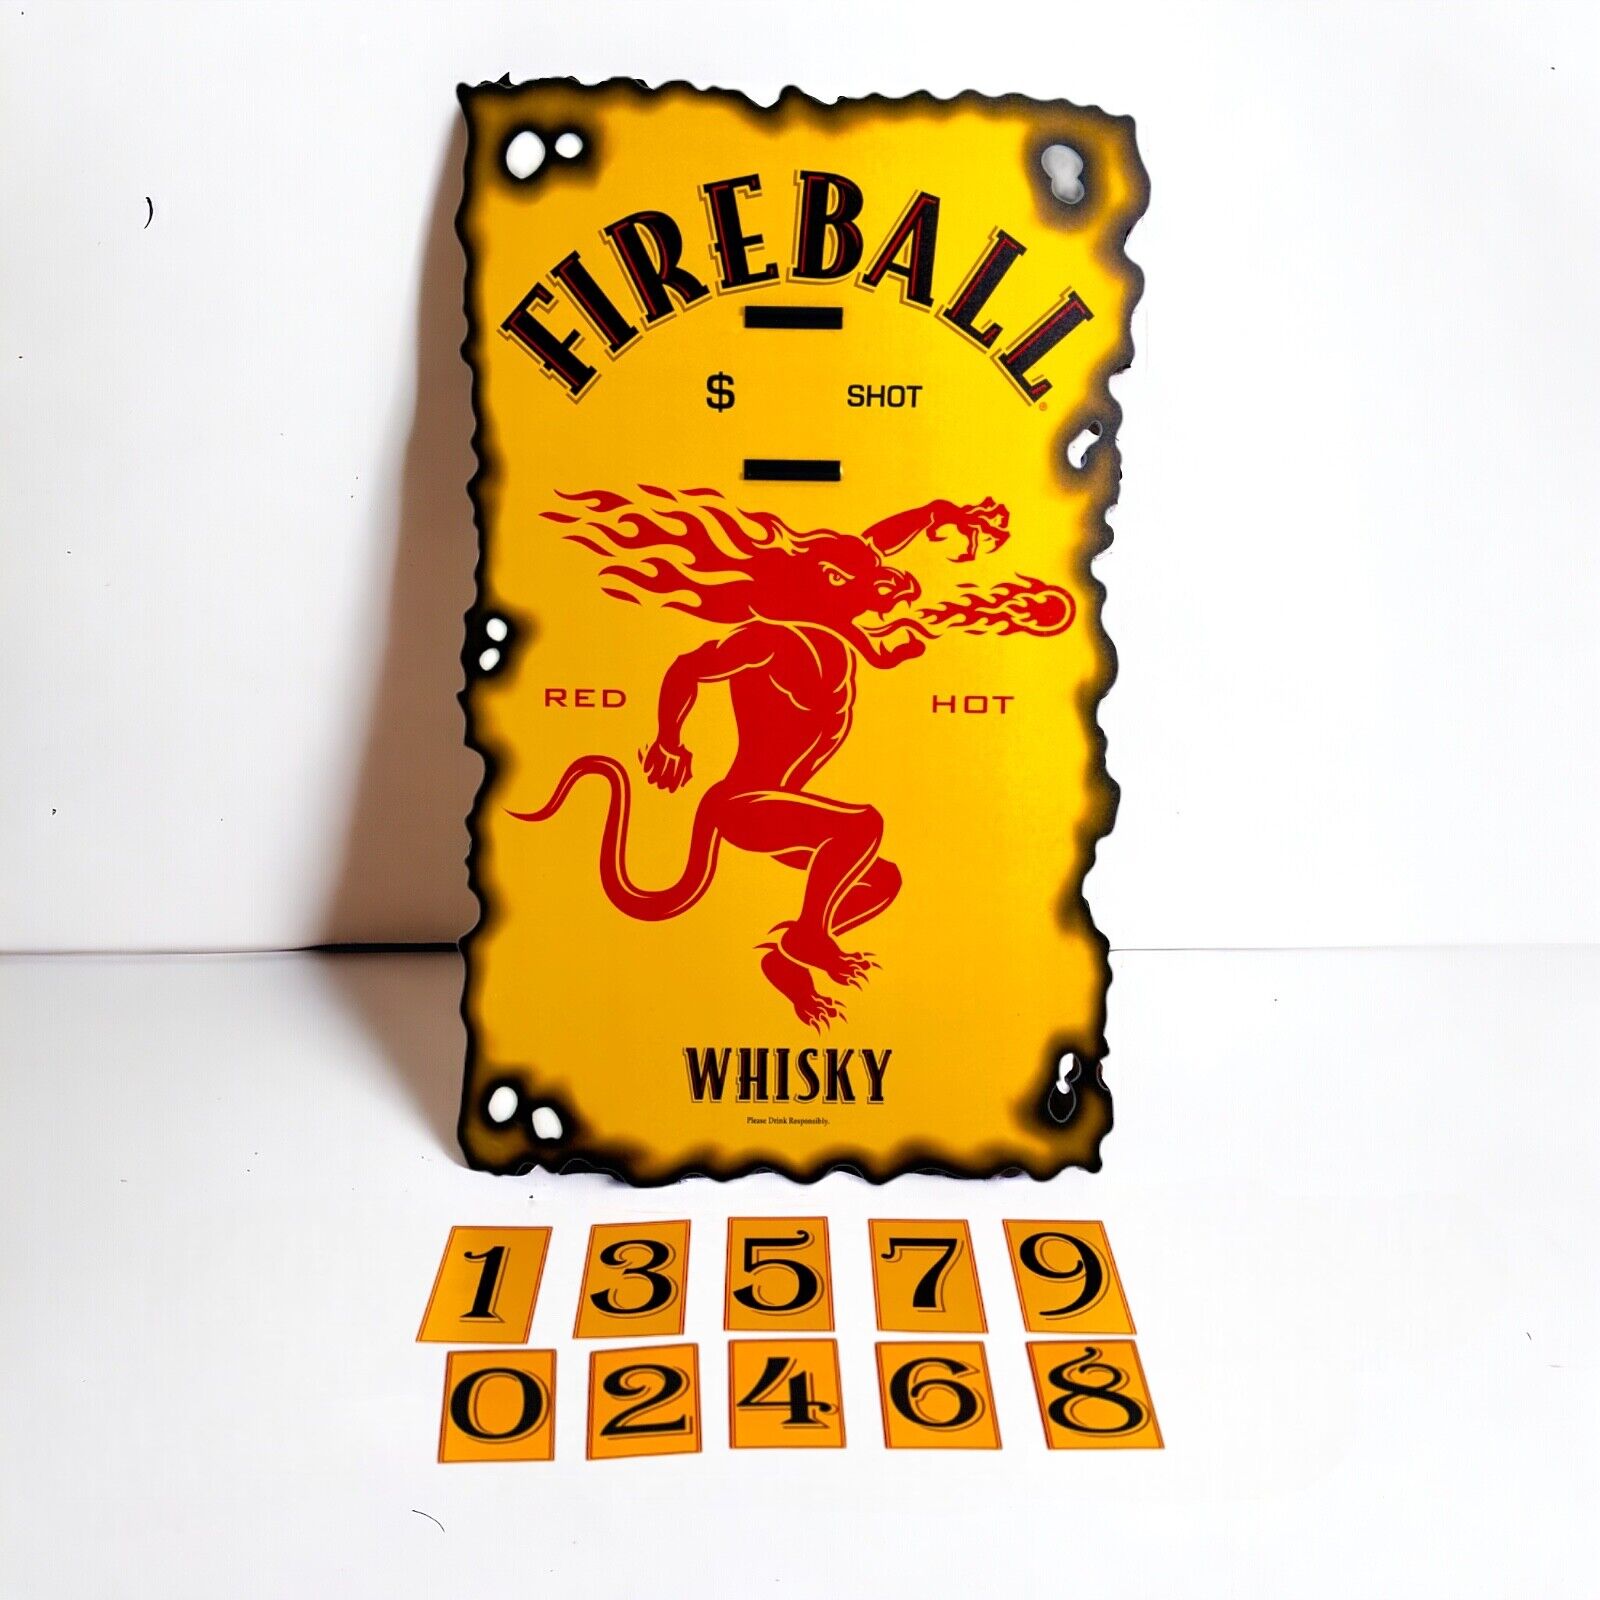 Fireball Whiskey Sign Shot Price Cards for bars, home bars, man cave Authentic